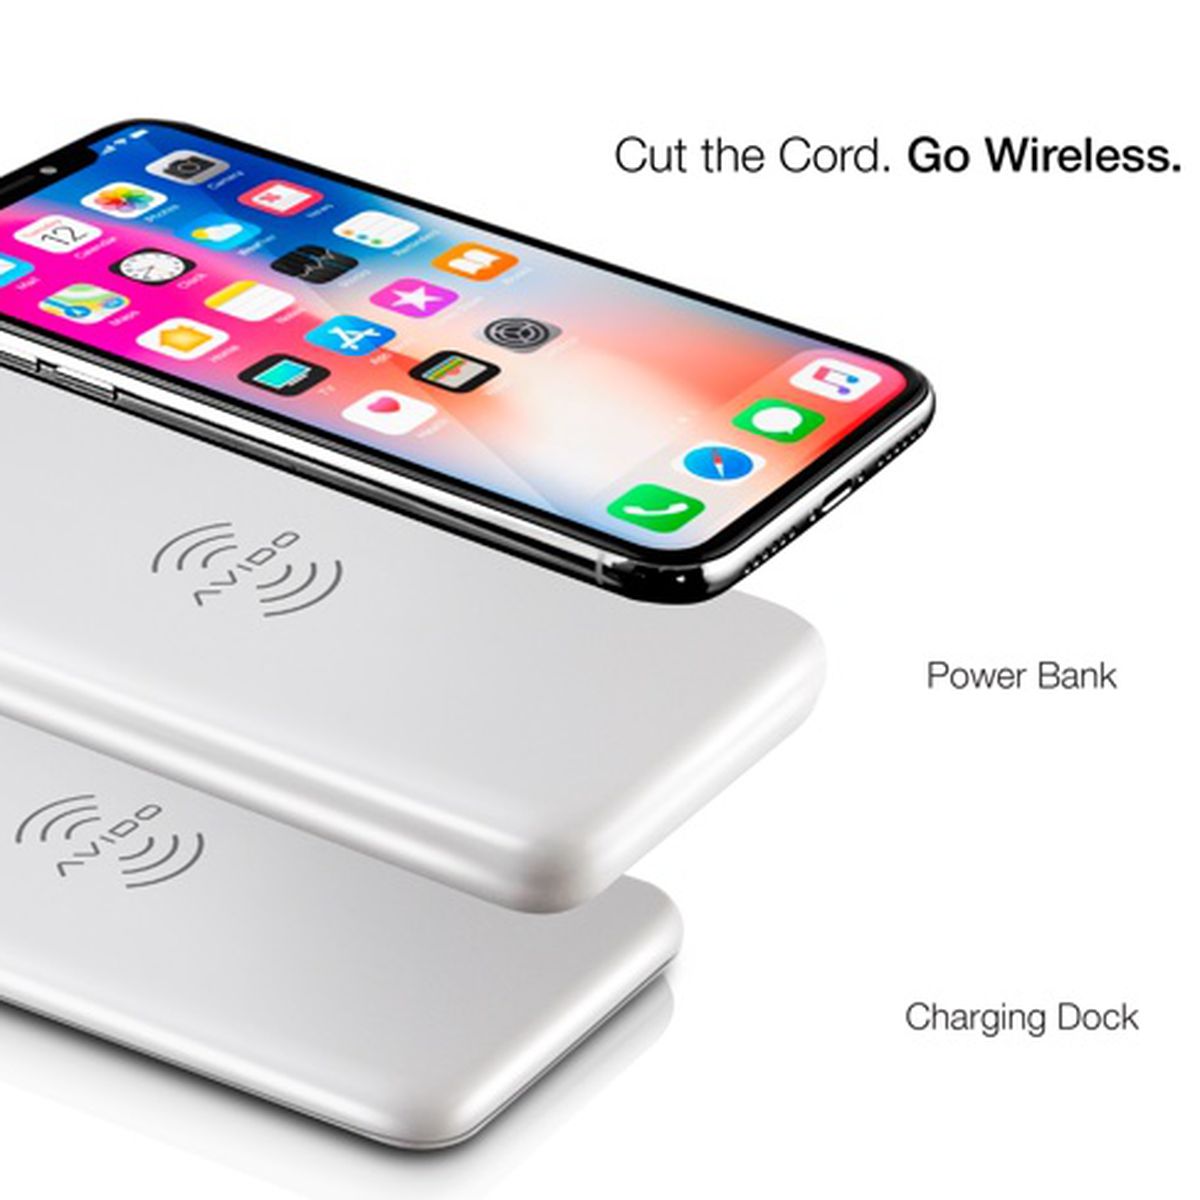 Udlænding opstrøms Bløde WiBa Power Bank Offers Fully Wireless Solution for Charging Your iPhone X,  8 and 8 Plus - MacRumors